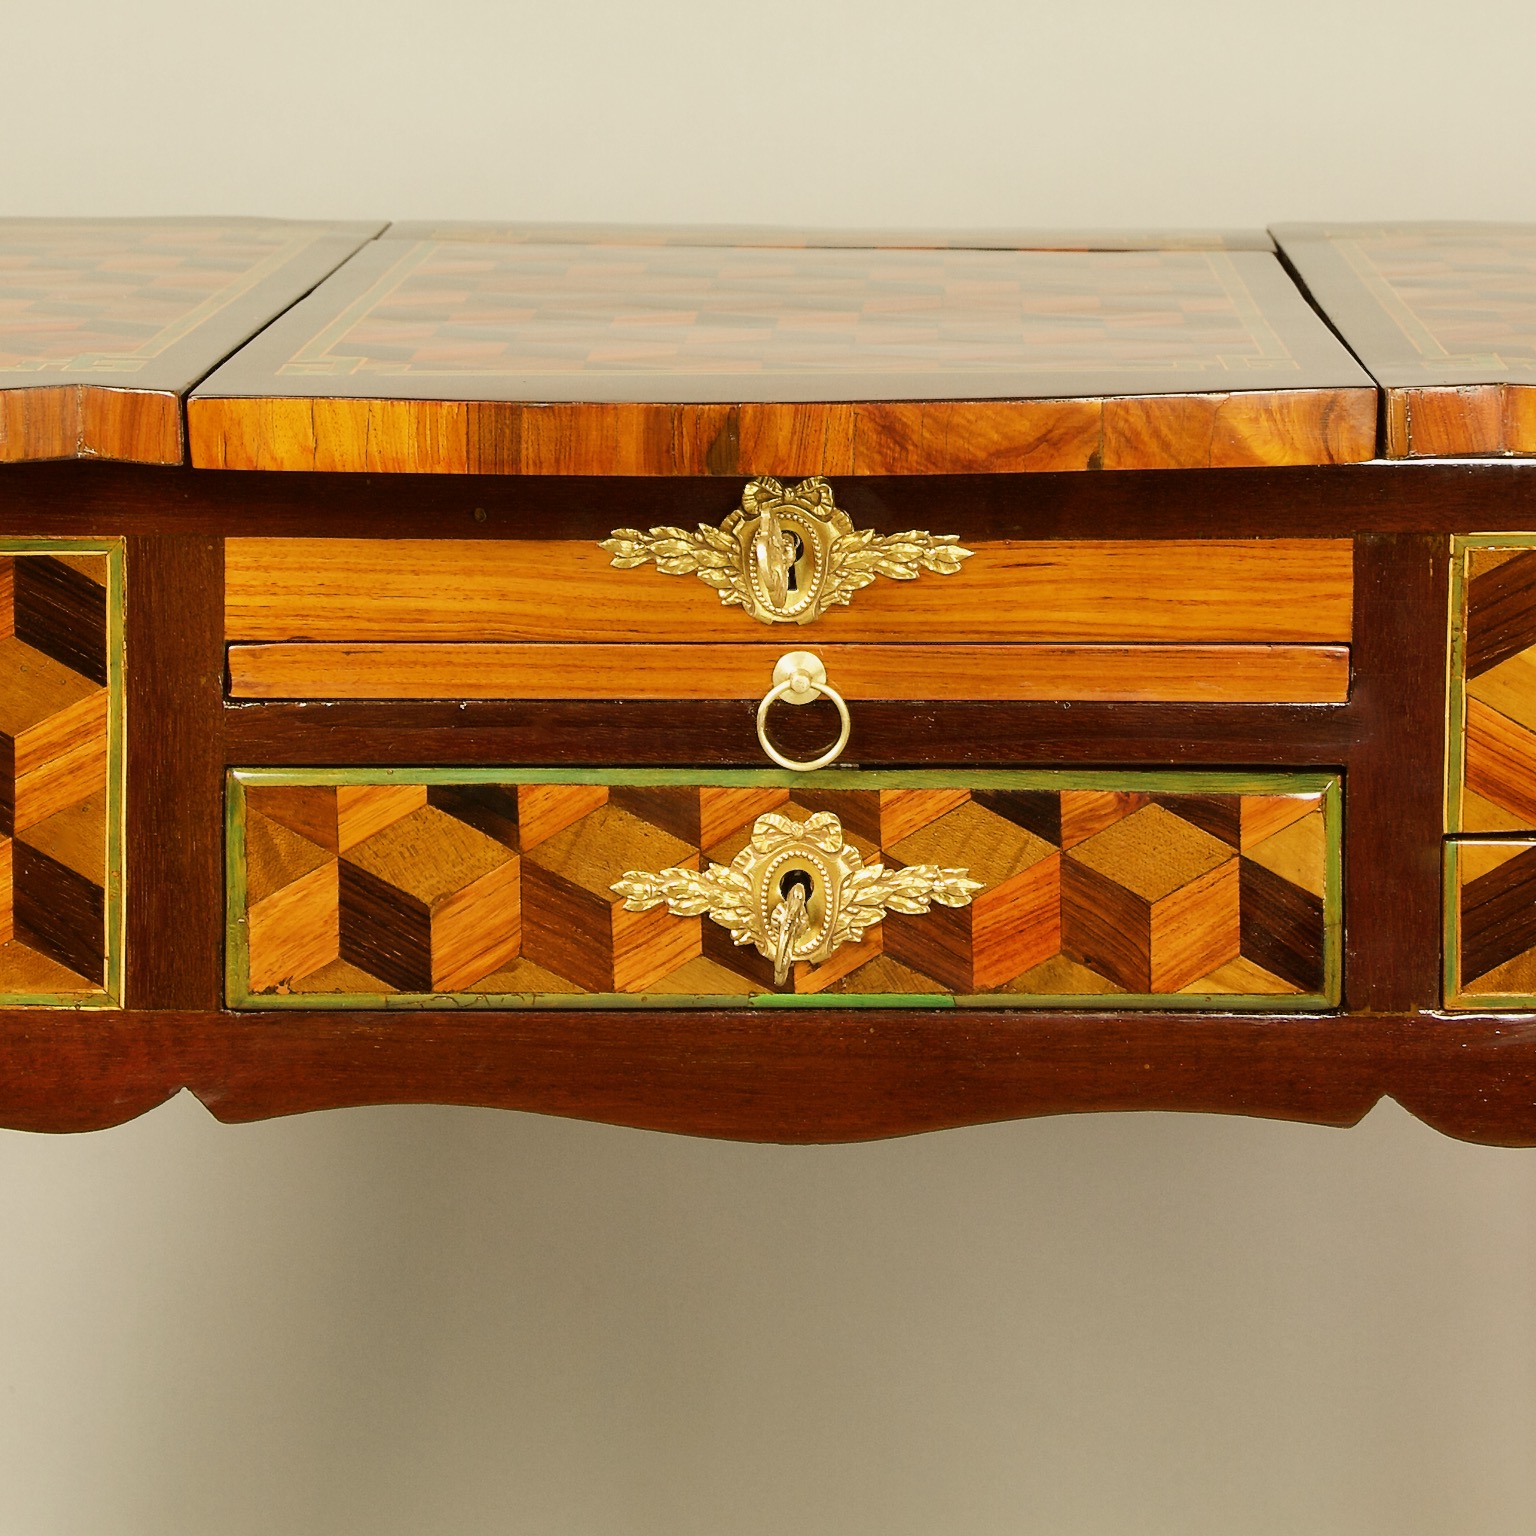 18th Century French Marquetry Louis XV Dressing Table or So-Called